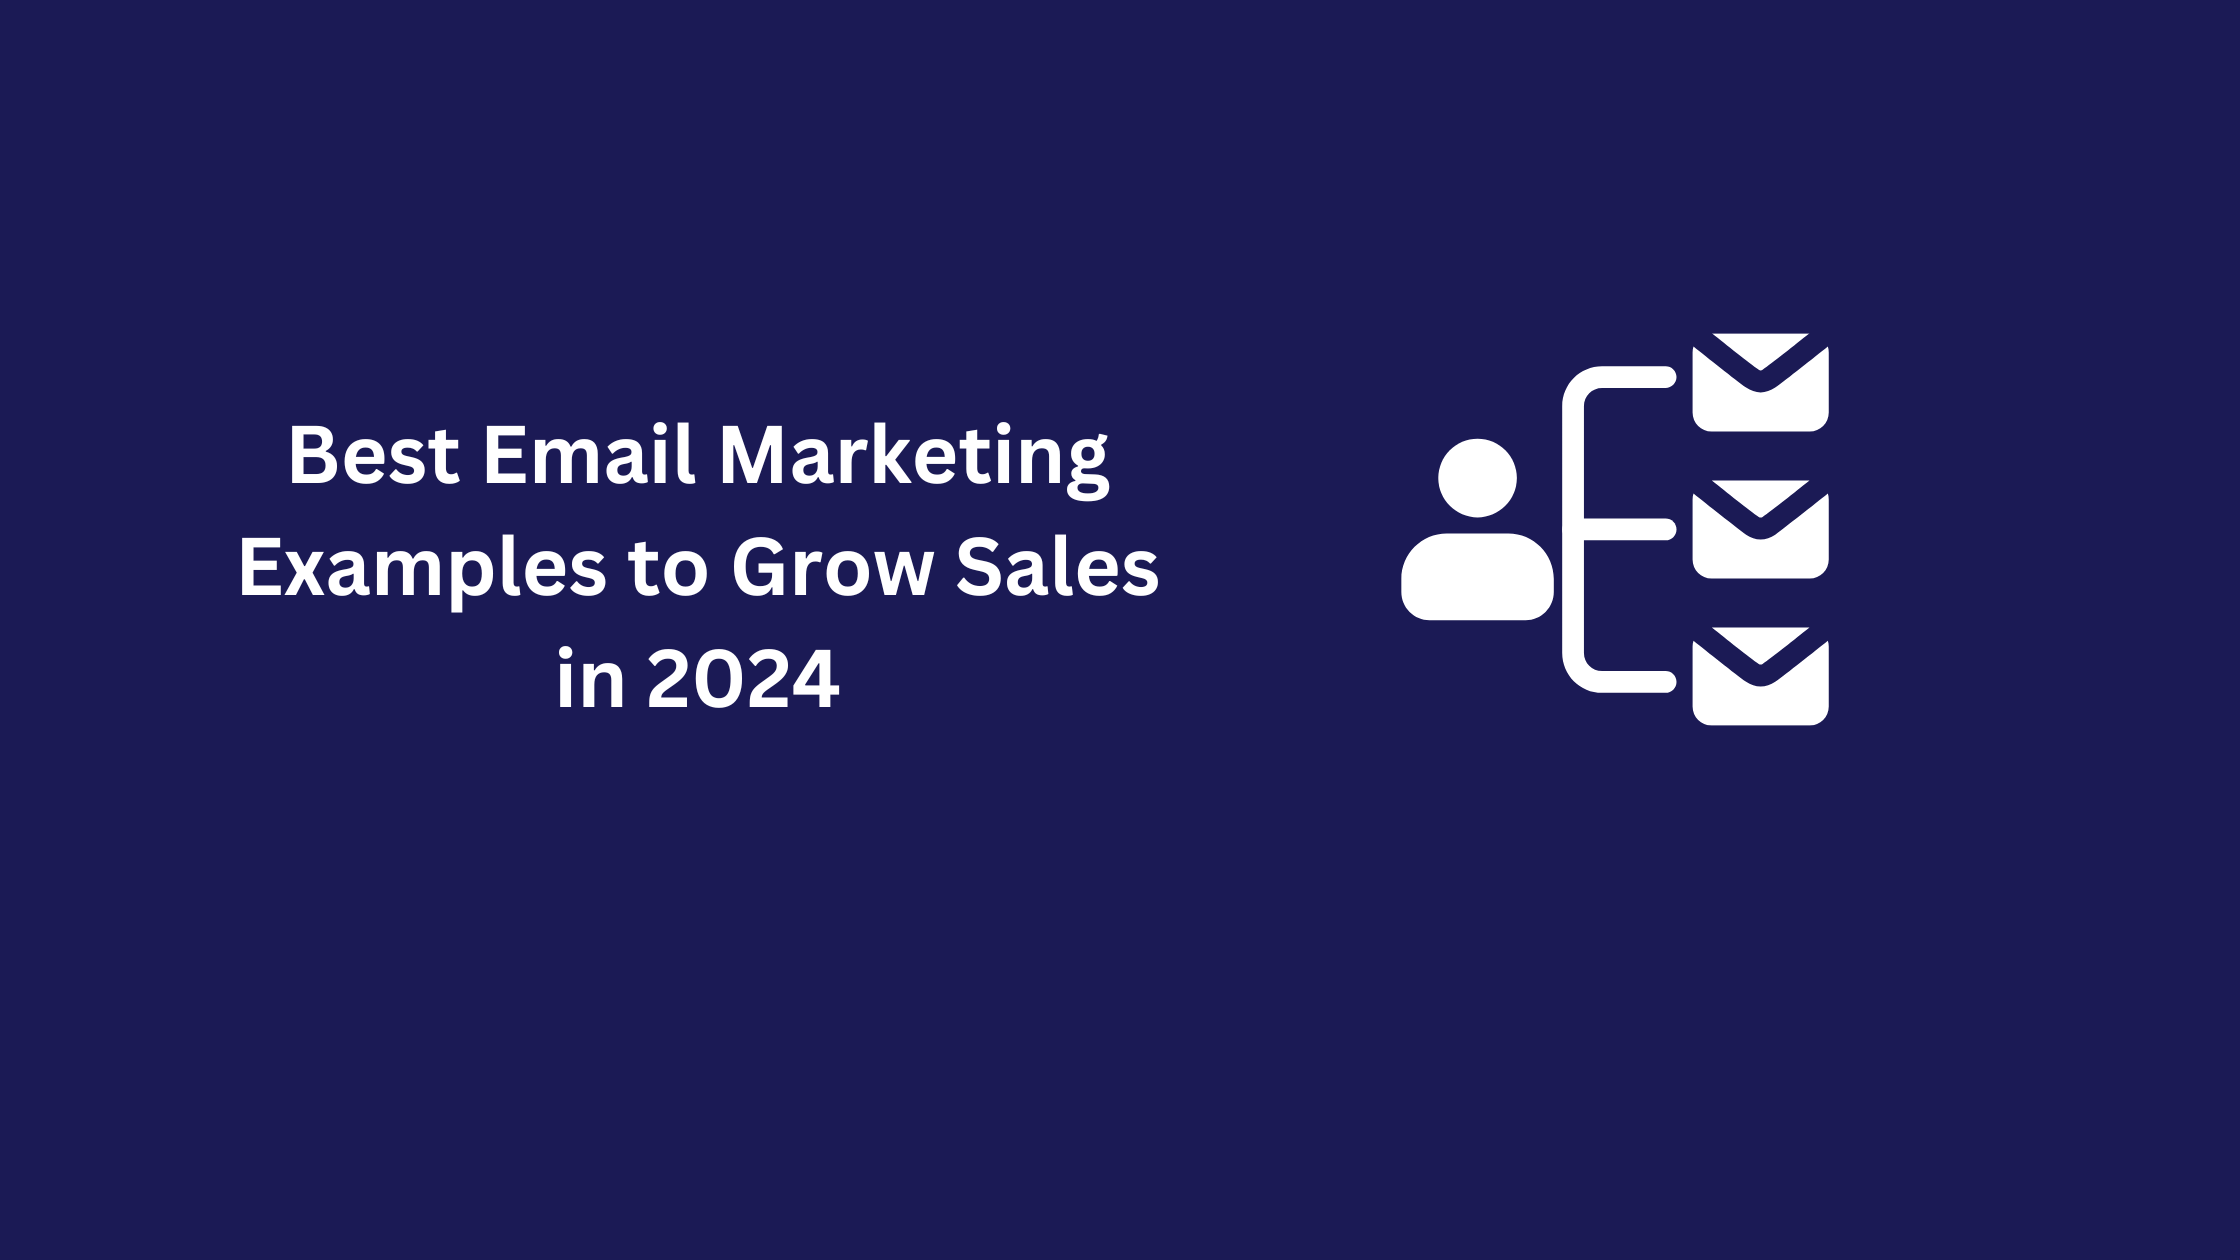 Best Email Marketing Examples to Grow Sales in 2024